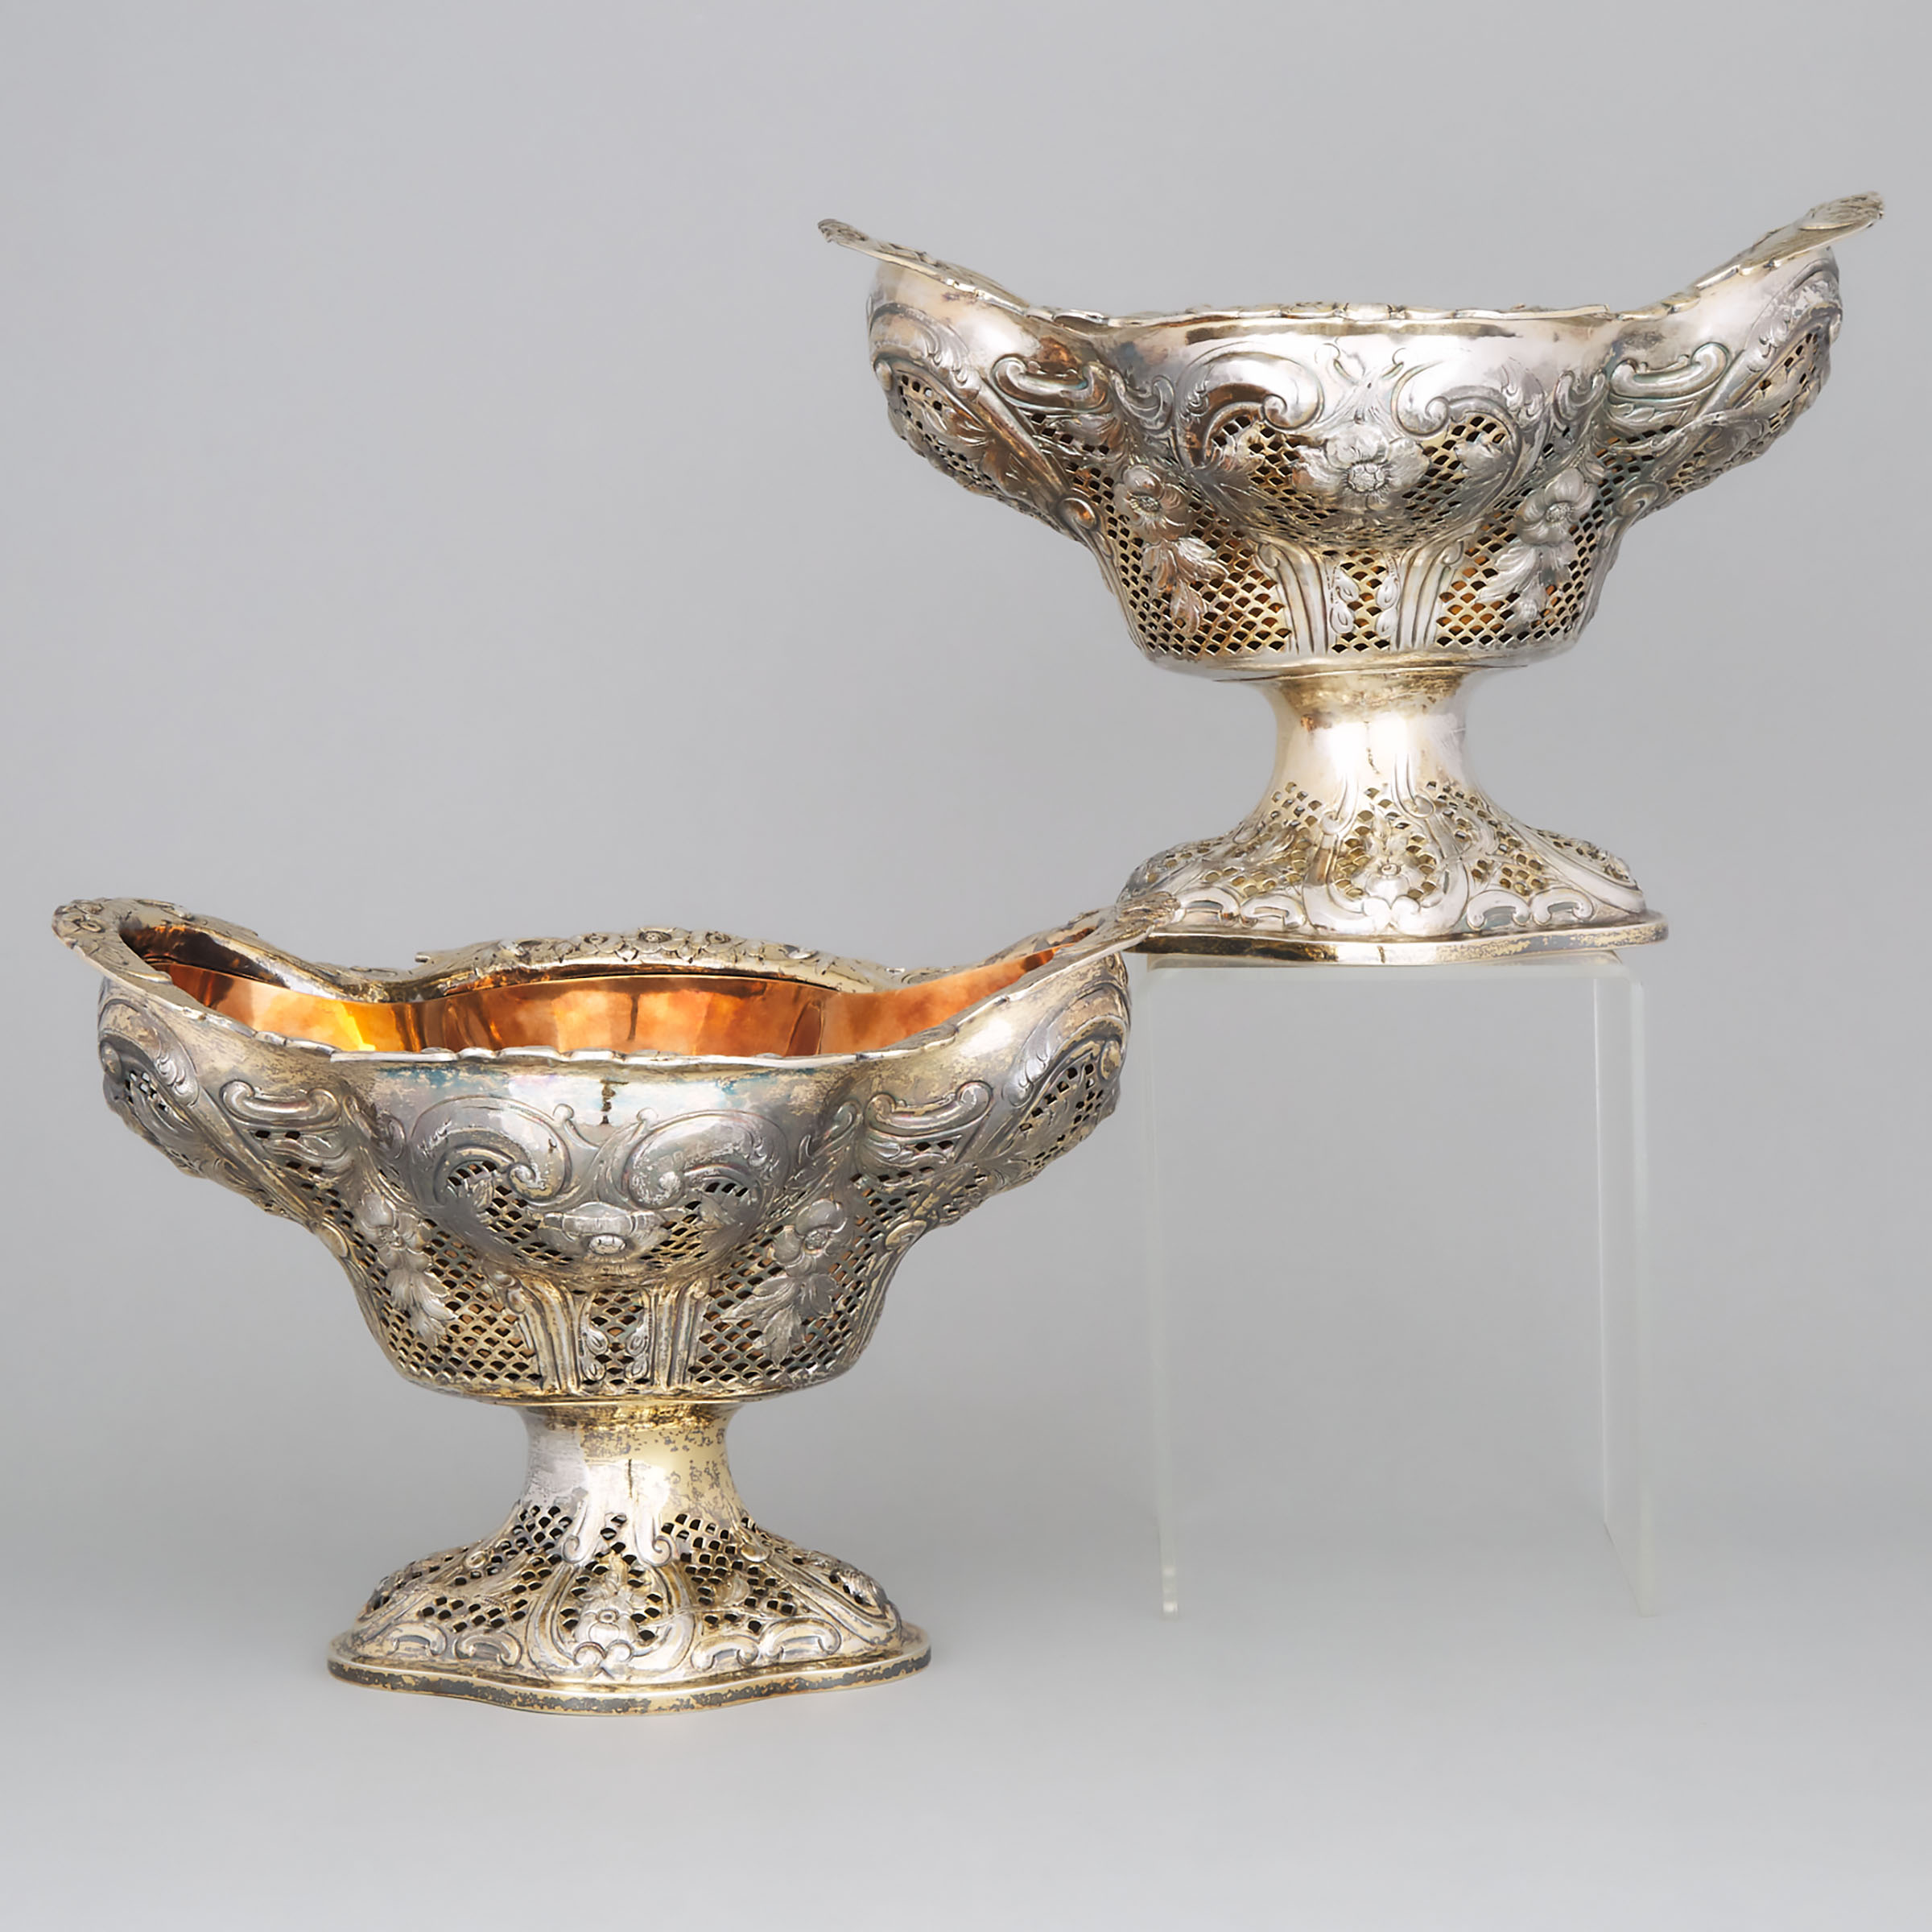 Pair of Continental Silver Parcel-Gilt Repoussé and Pierced Large Footed Comports, 20th century